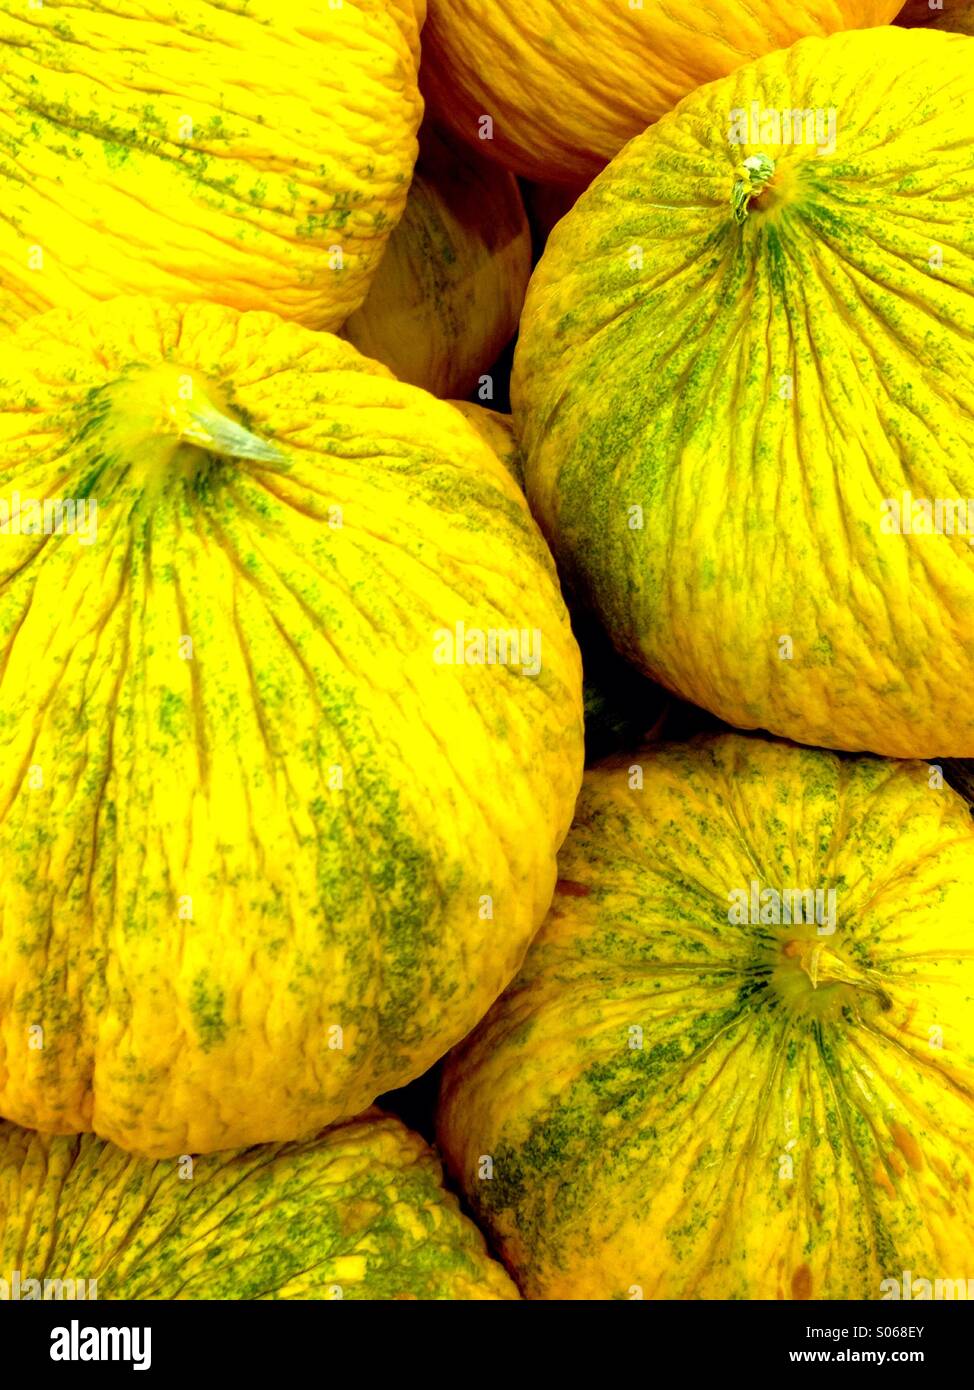 Bright yellow melons Stock Photo